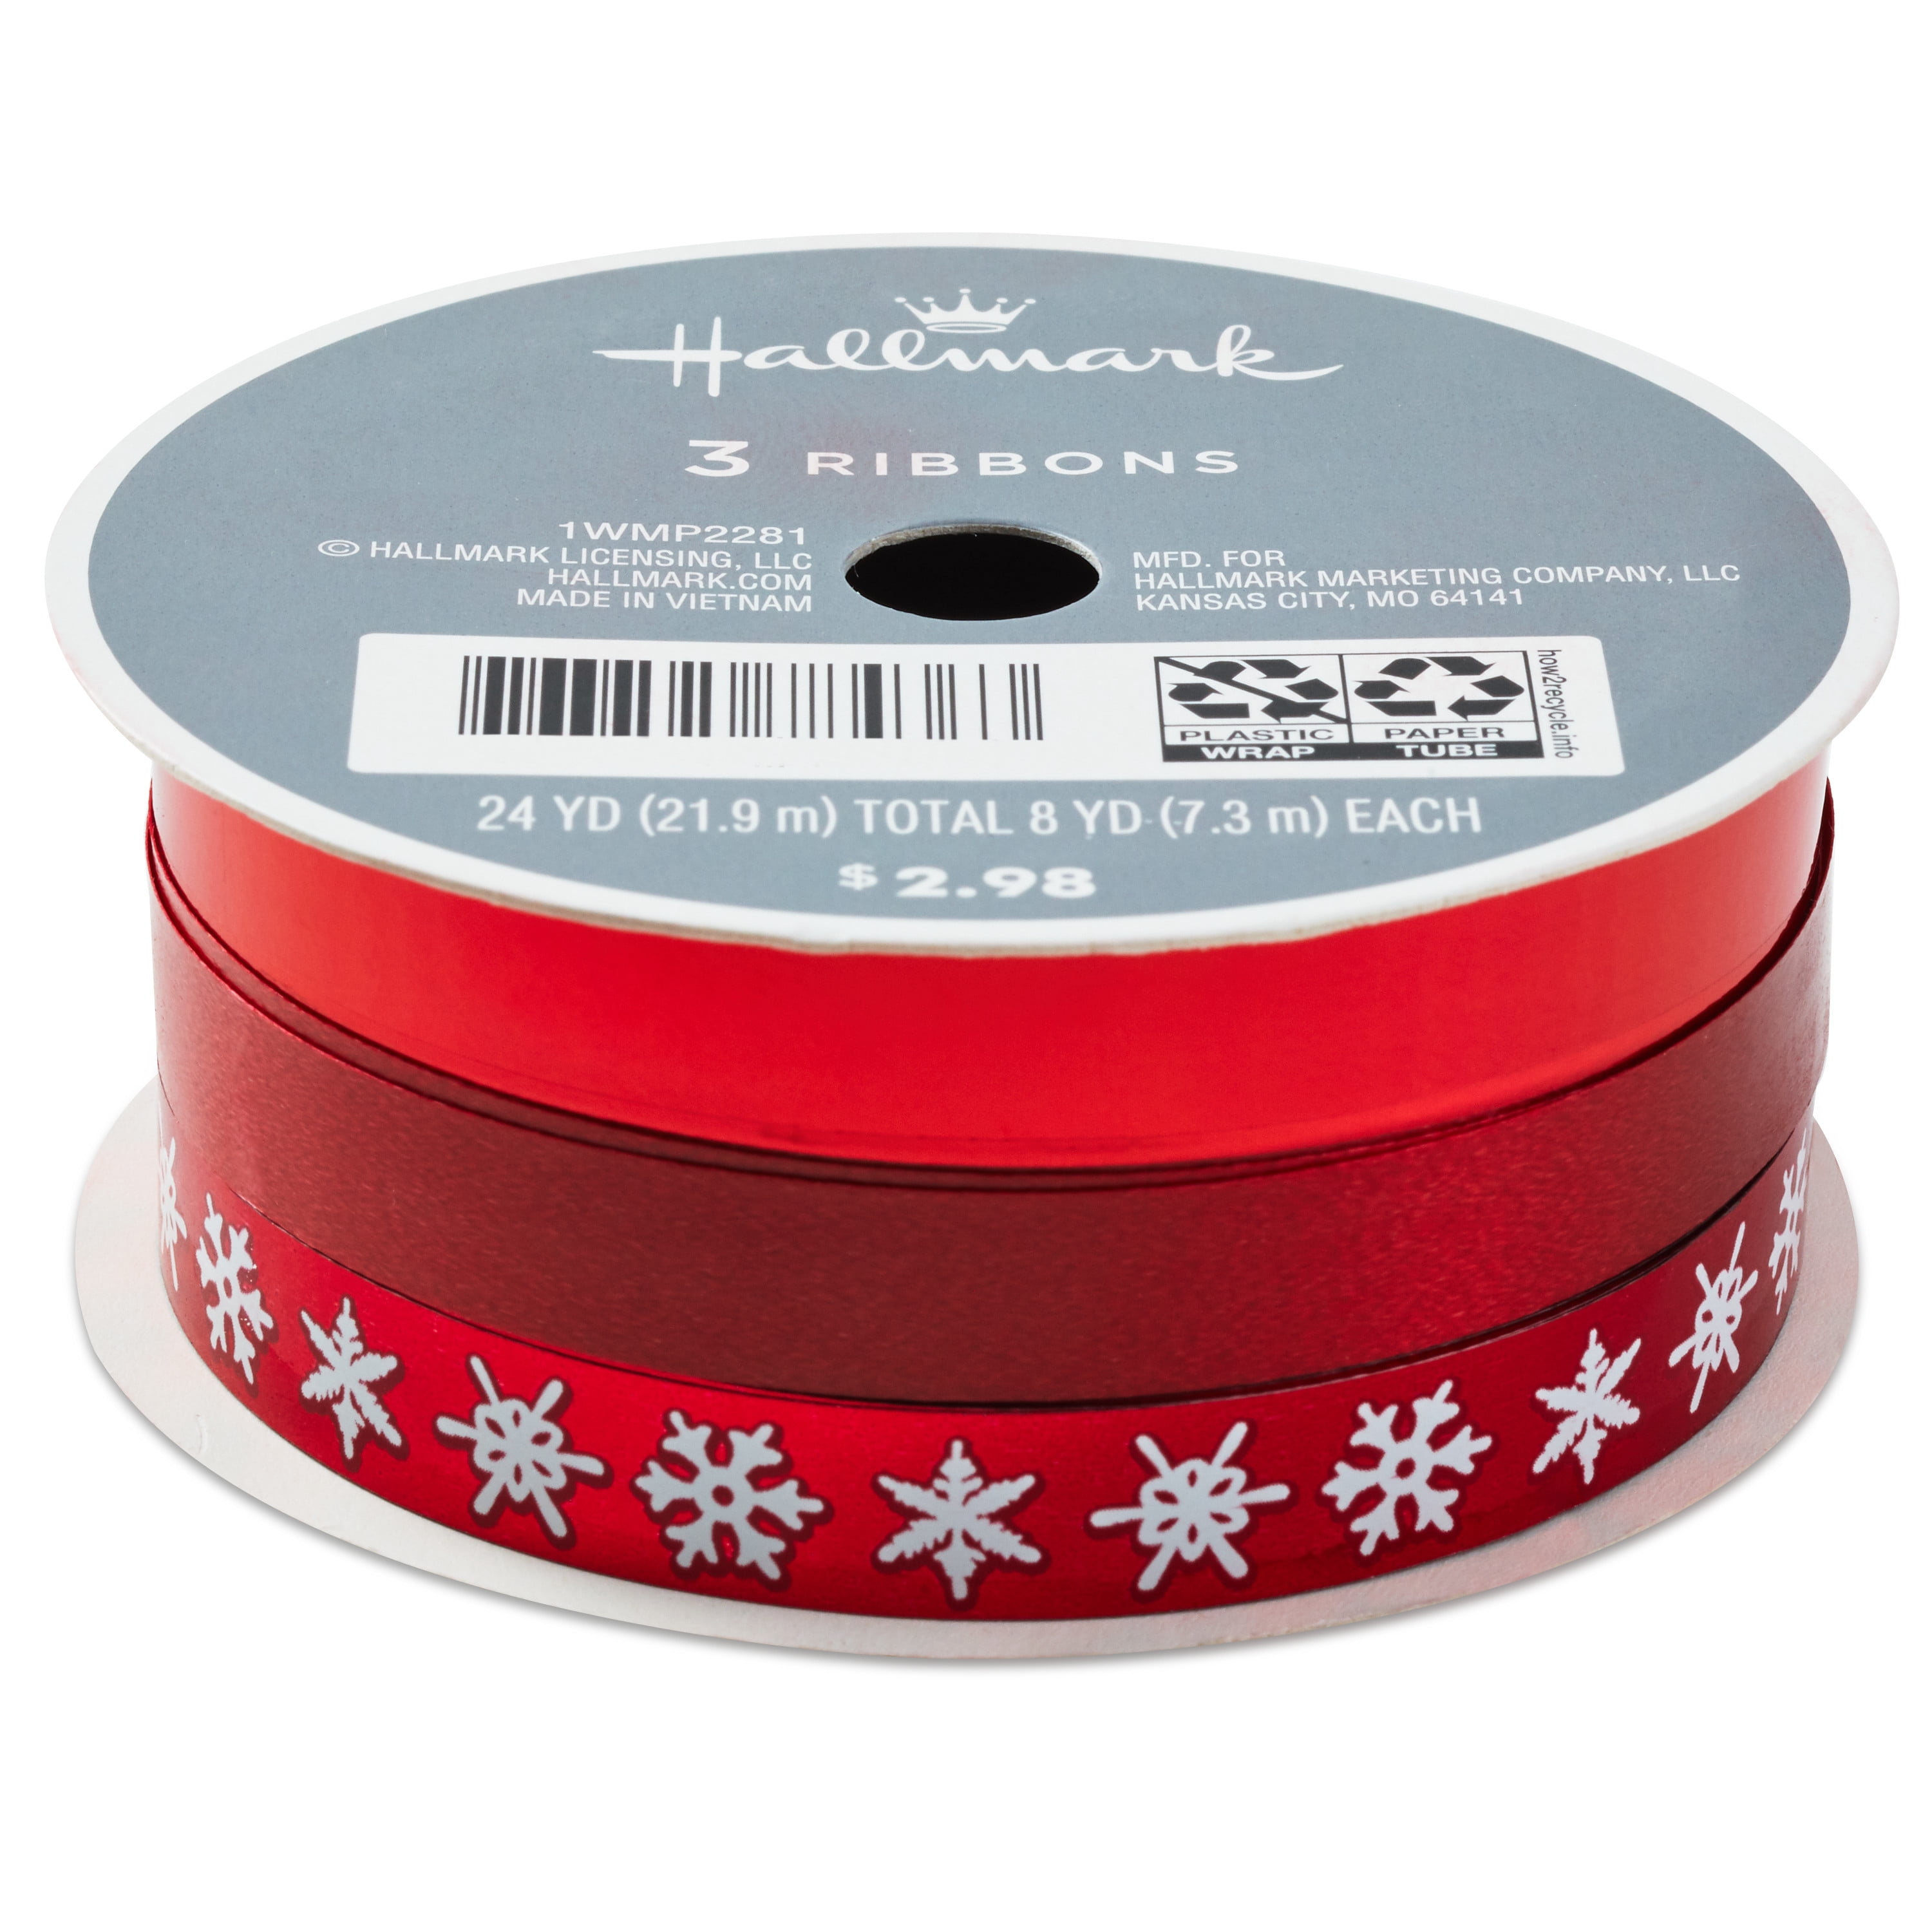 Hallmark 3-Pack Christmas Curling Ribbon (Assorted Red Designs)